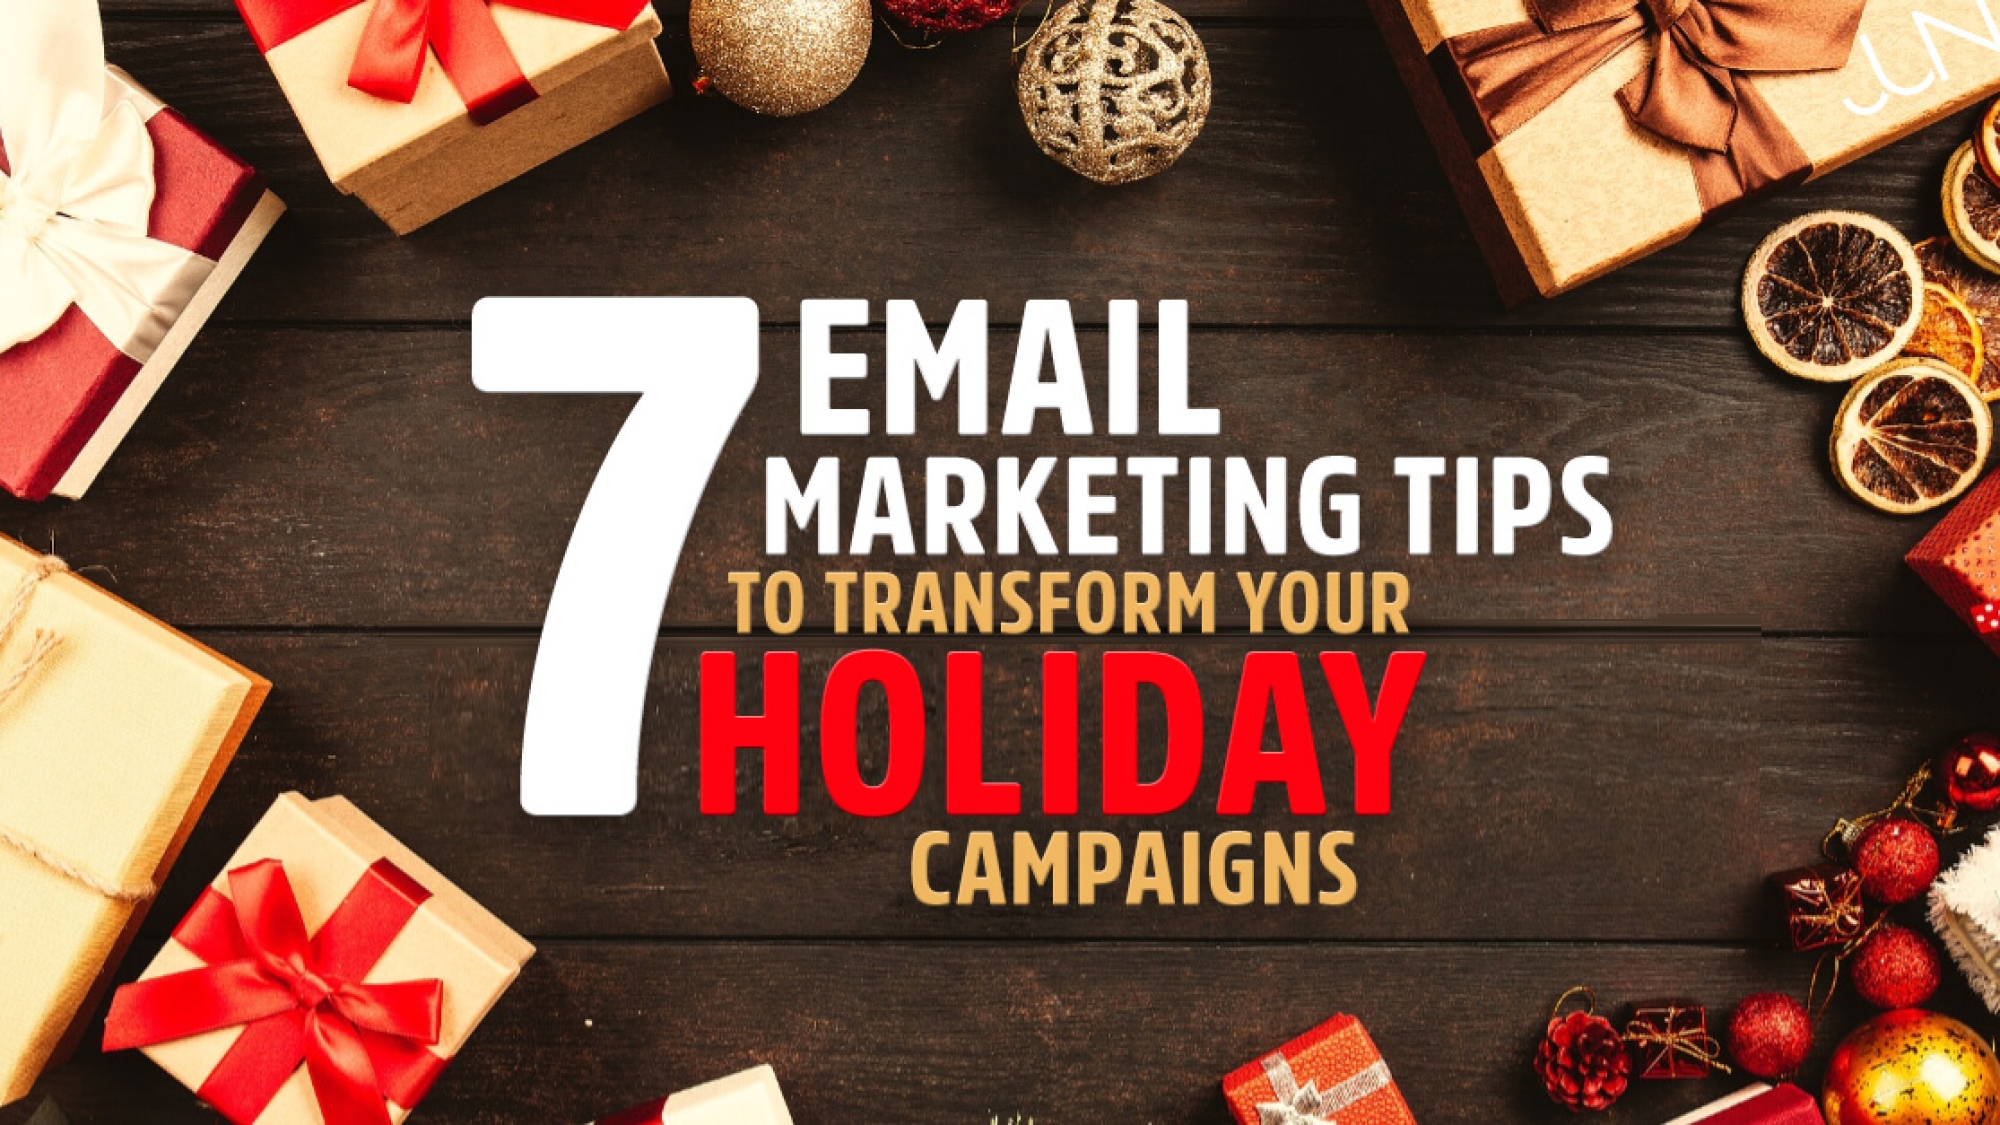 231206-JCI-Blog-Post-7-Email-Marketing-Tips-to-Transform-Your-Holiday-Campaigns-Linkedin-2.jpg